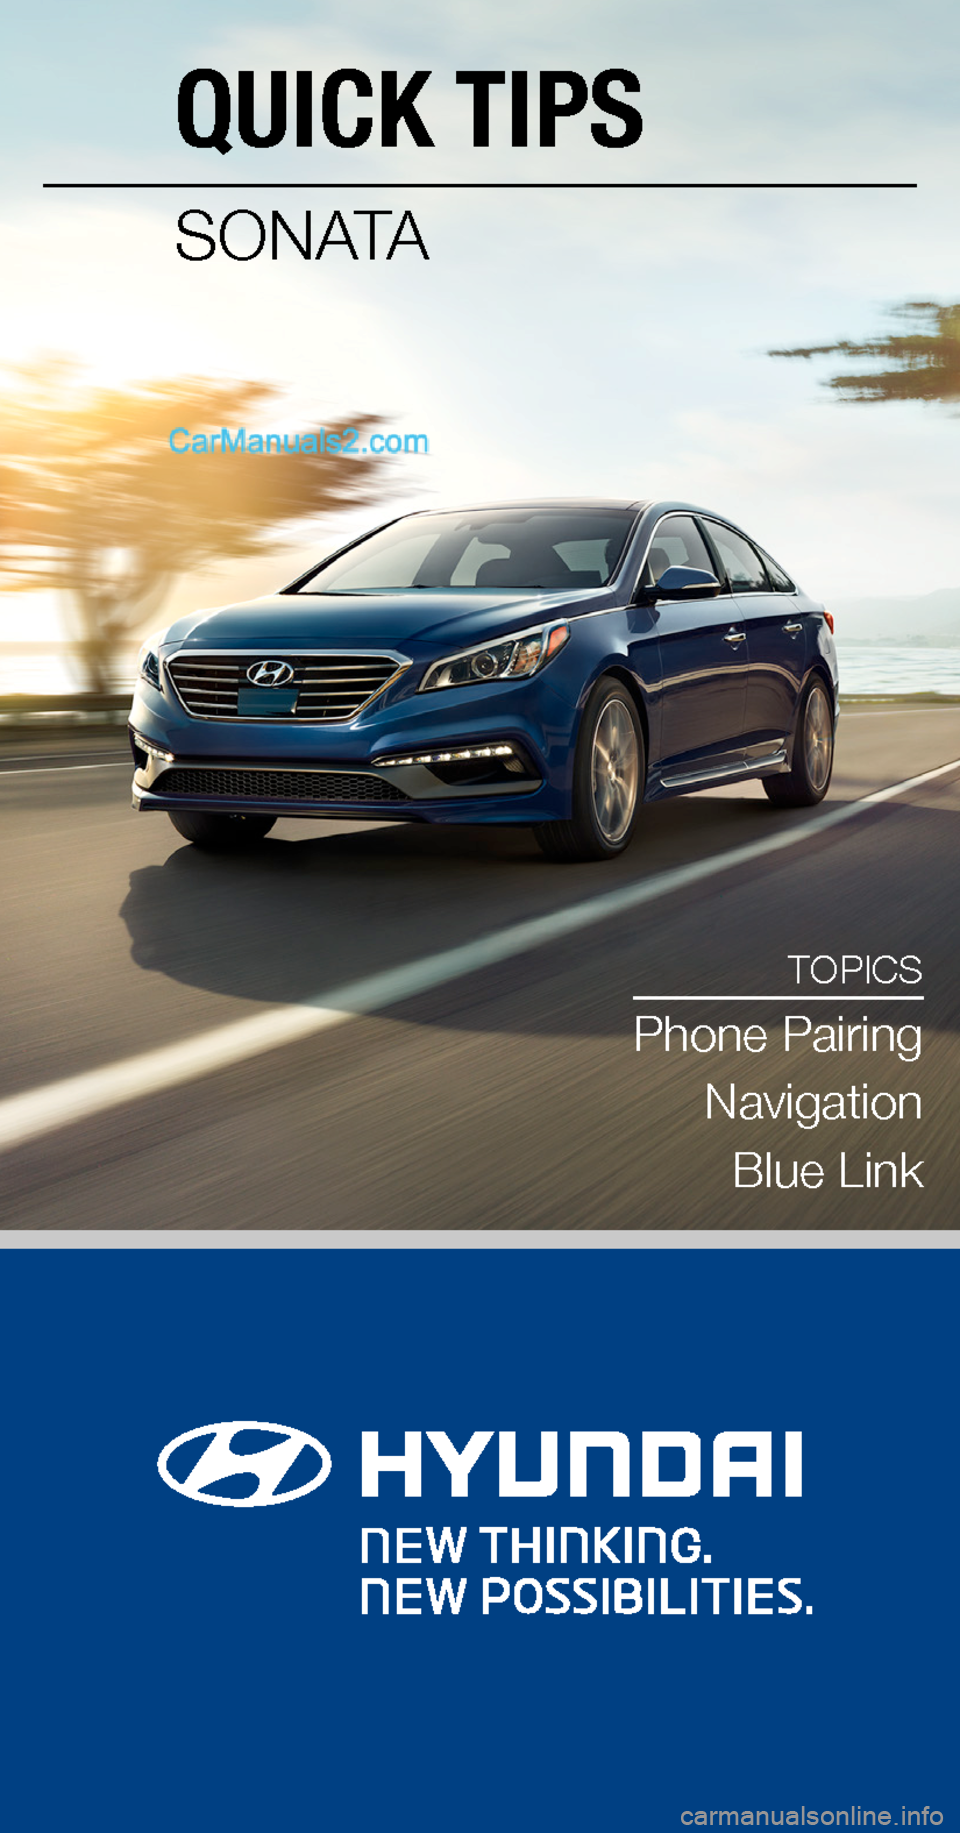 Hyundai Sonata 2015  Quick Tips TOPICS
Phone Pairing
Navigation
Blue Link
To start voice command, press the TALK button
HELP provides guidance on commands that can  be used within the current function
CALL calls a name saved in Cont